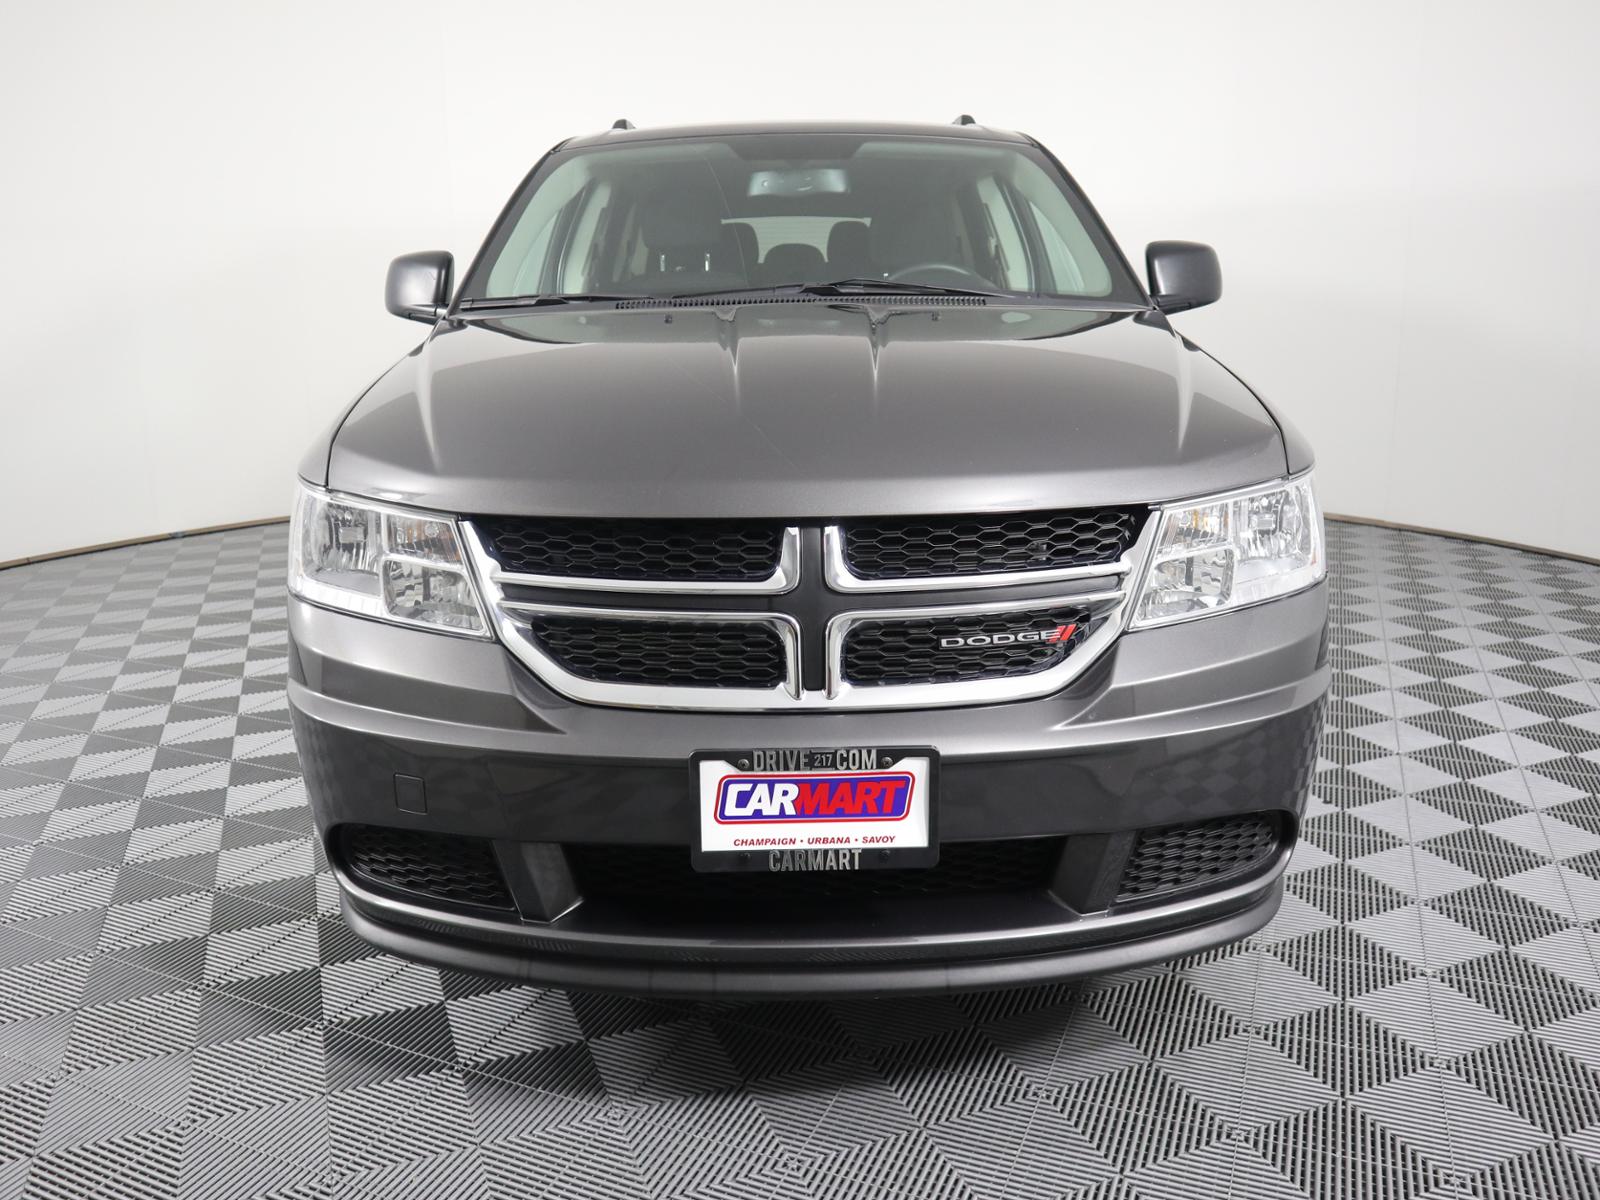 Pre Owned 2017 Dodge Journey SE FWD Sport Utility in Savoy T01064 